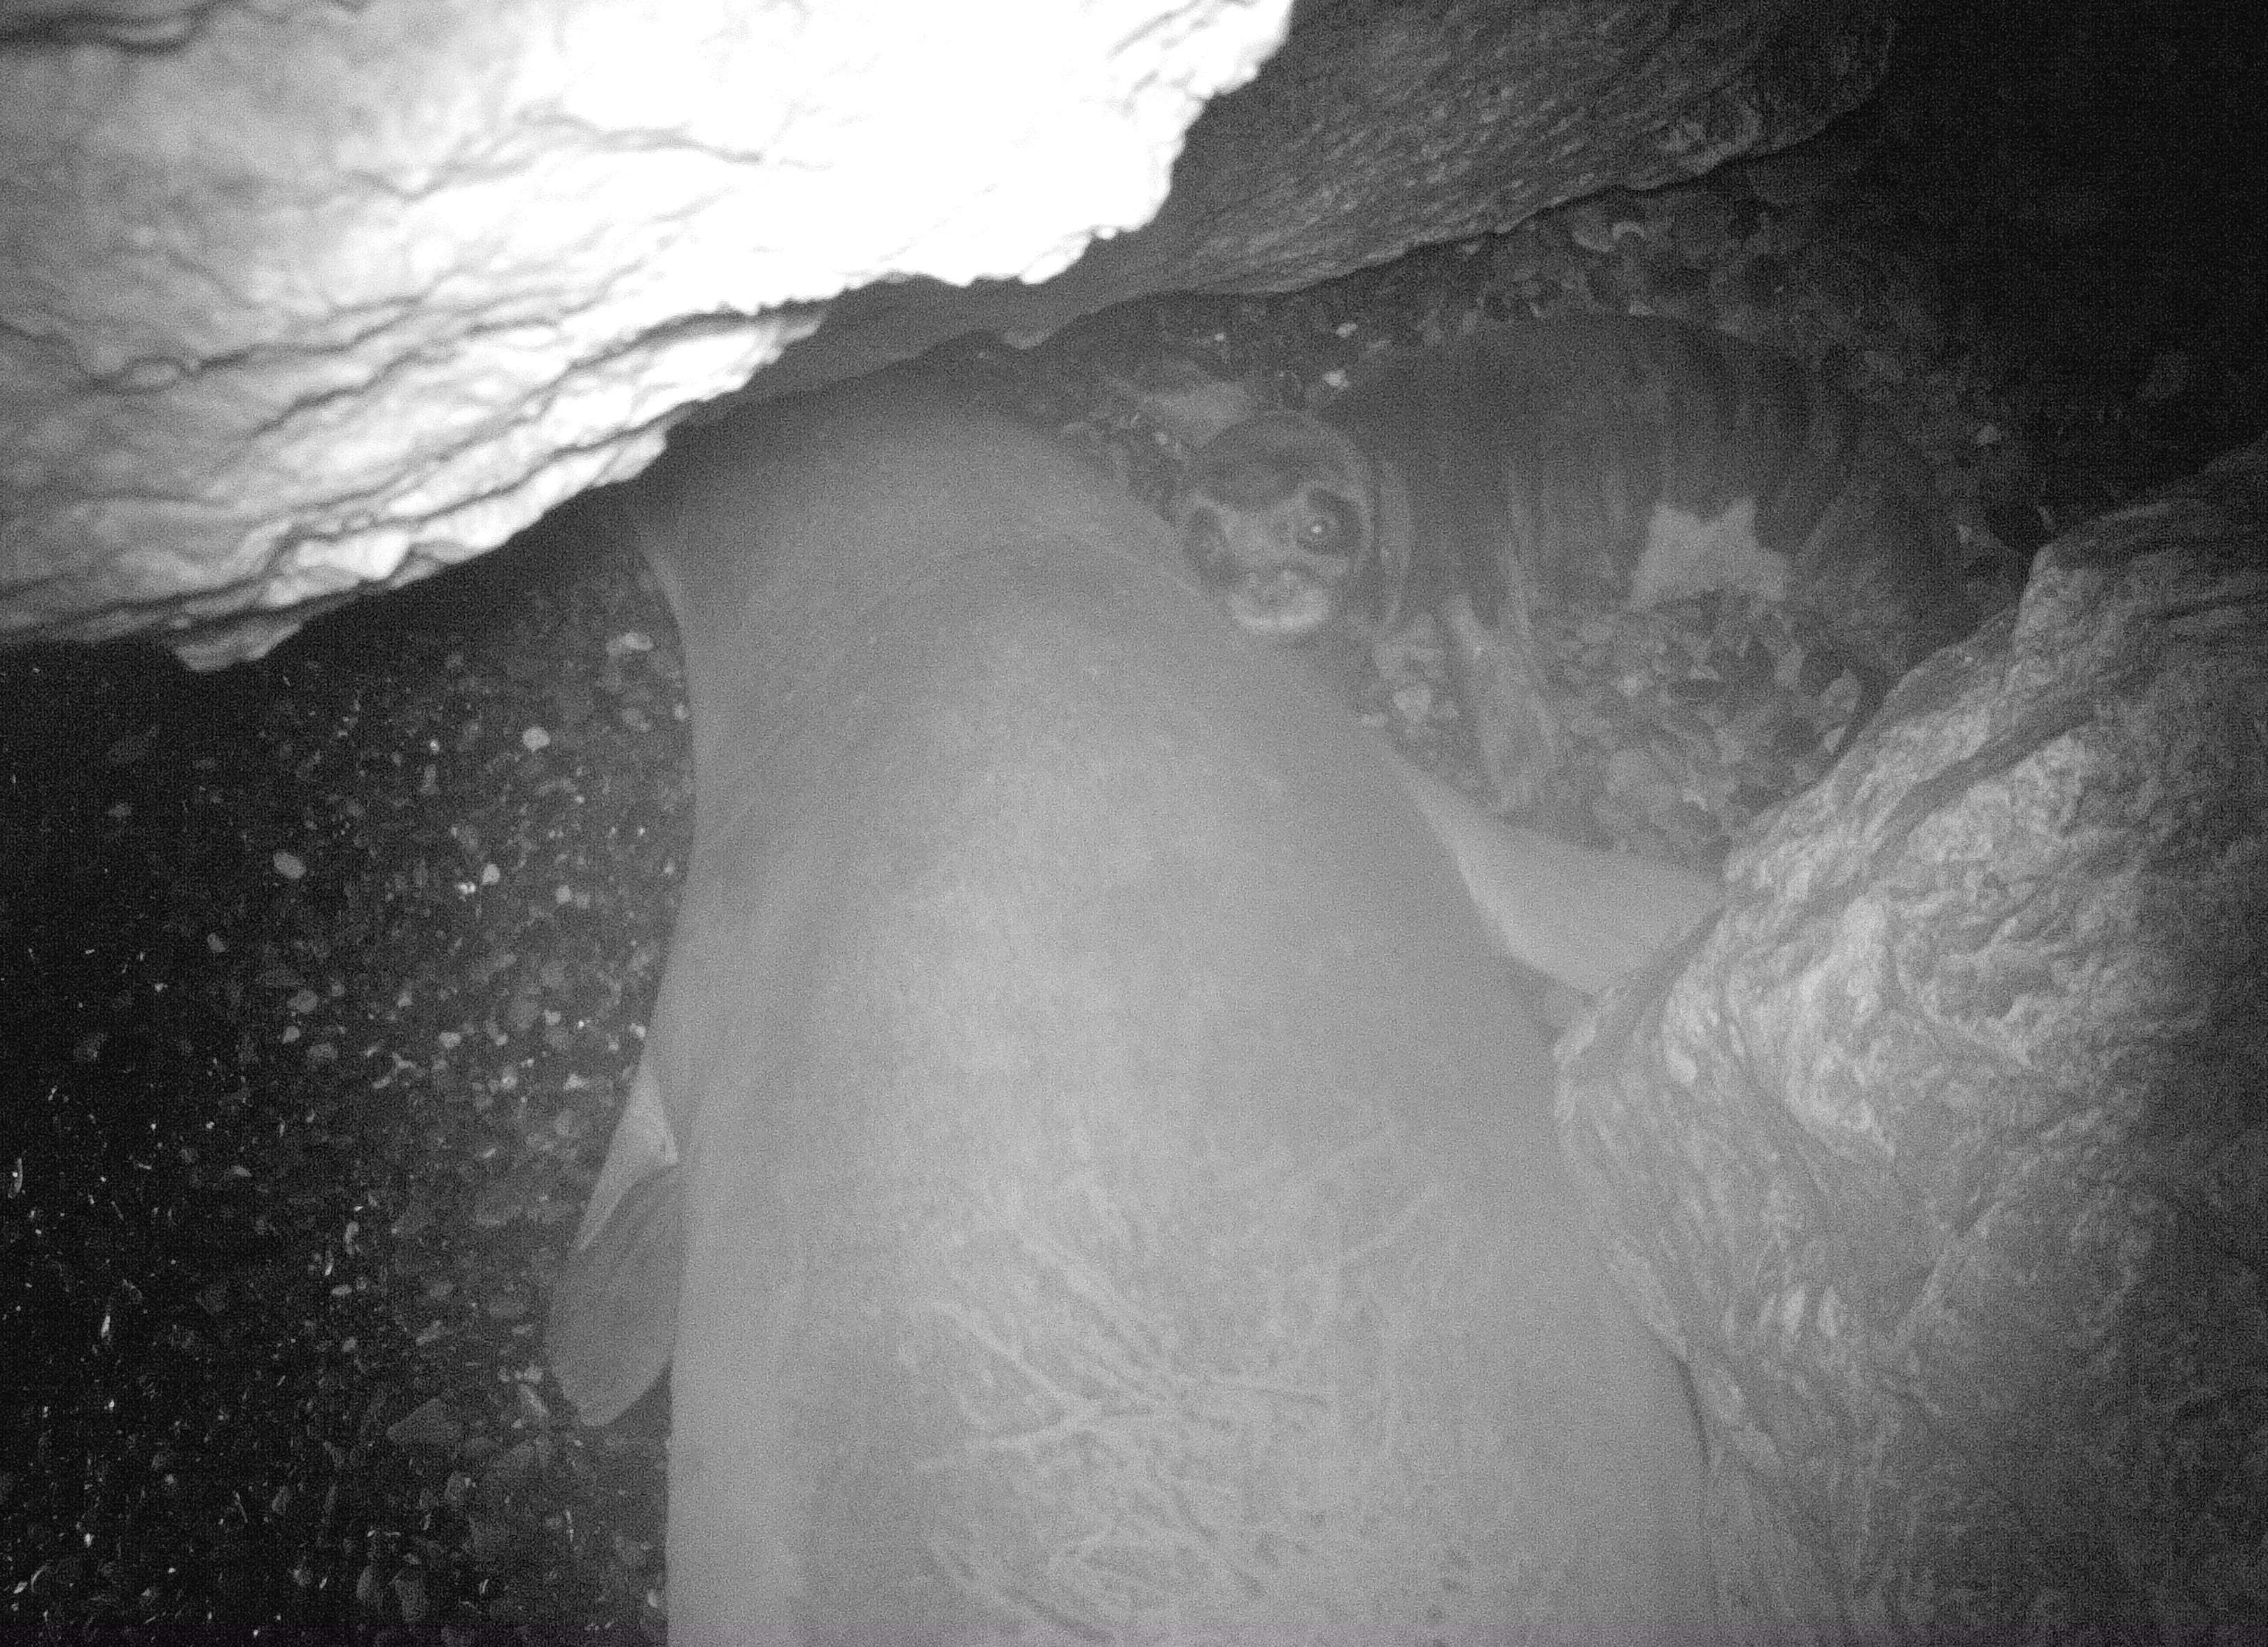 The camera traps allowed researchers to look into inaccessible caves with underwater entrances used by the seals